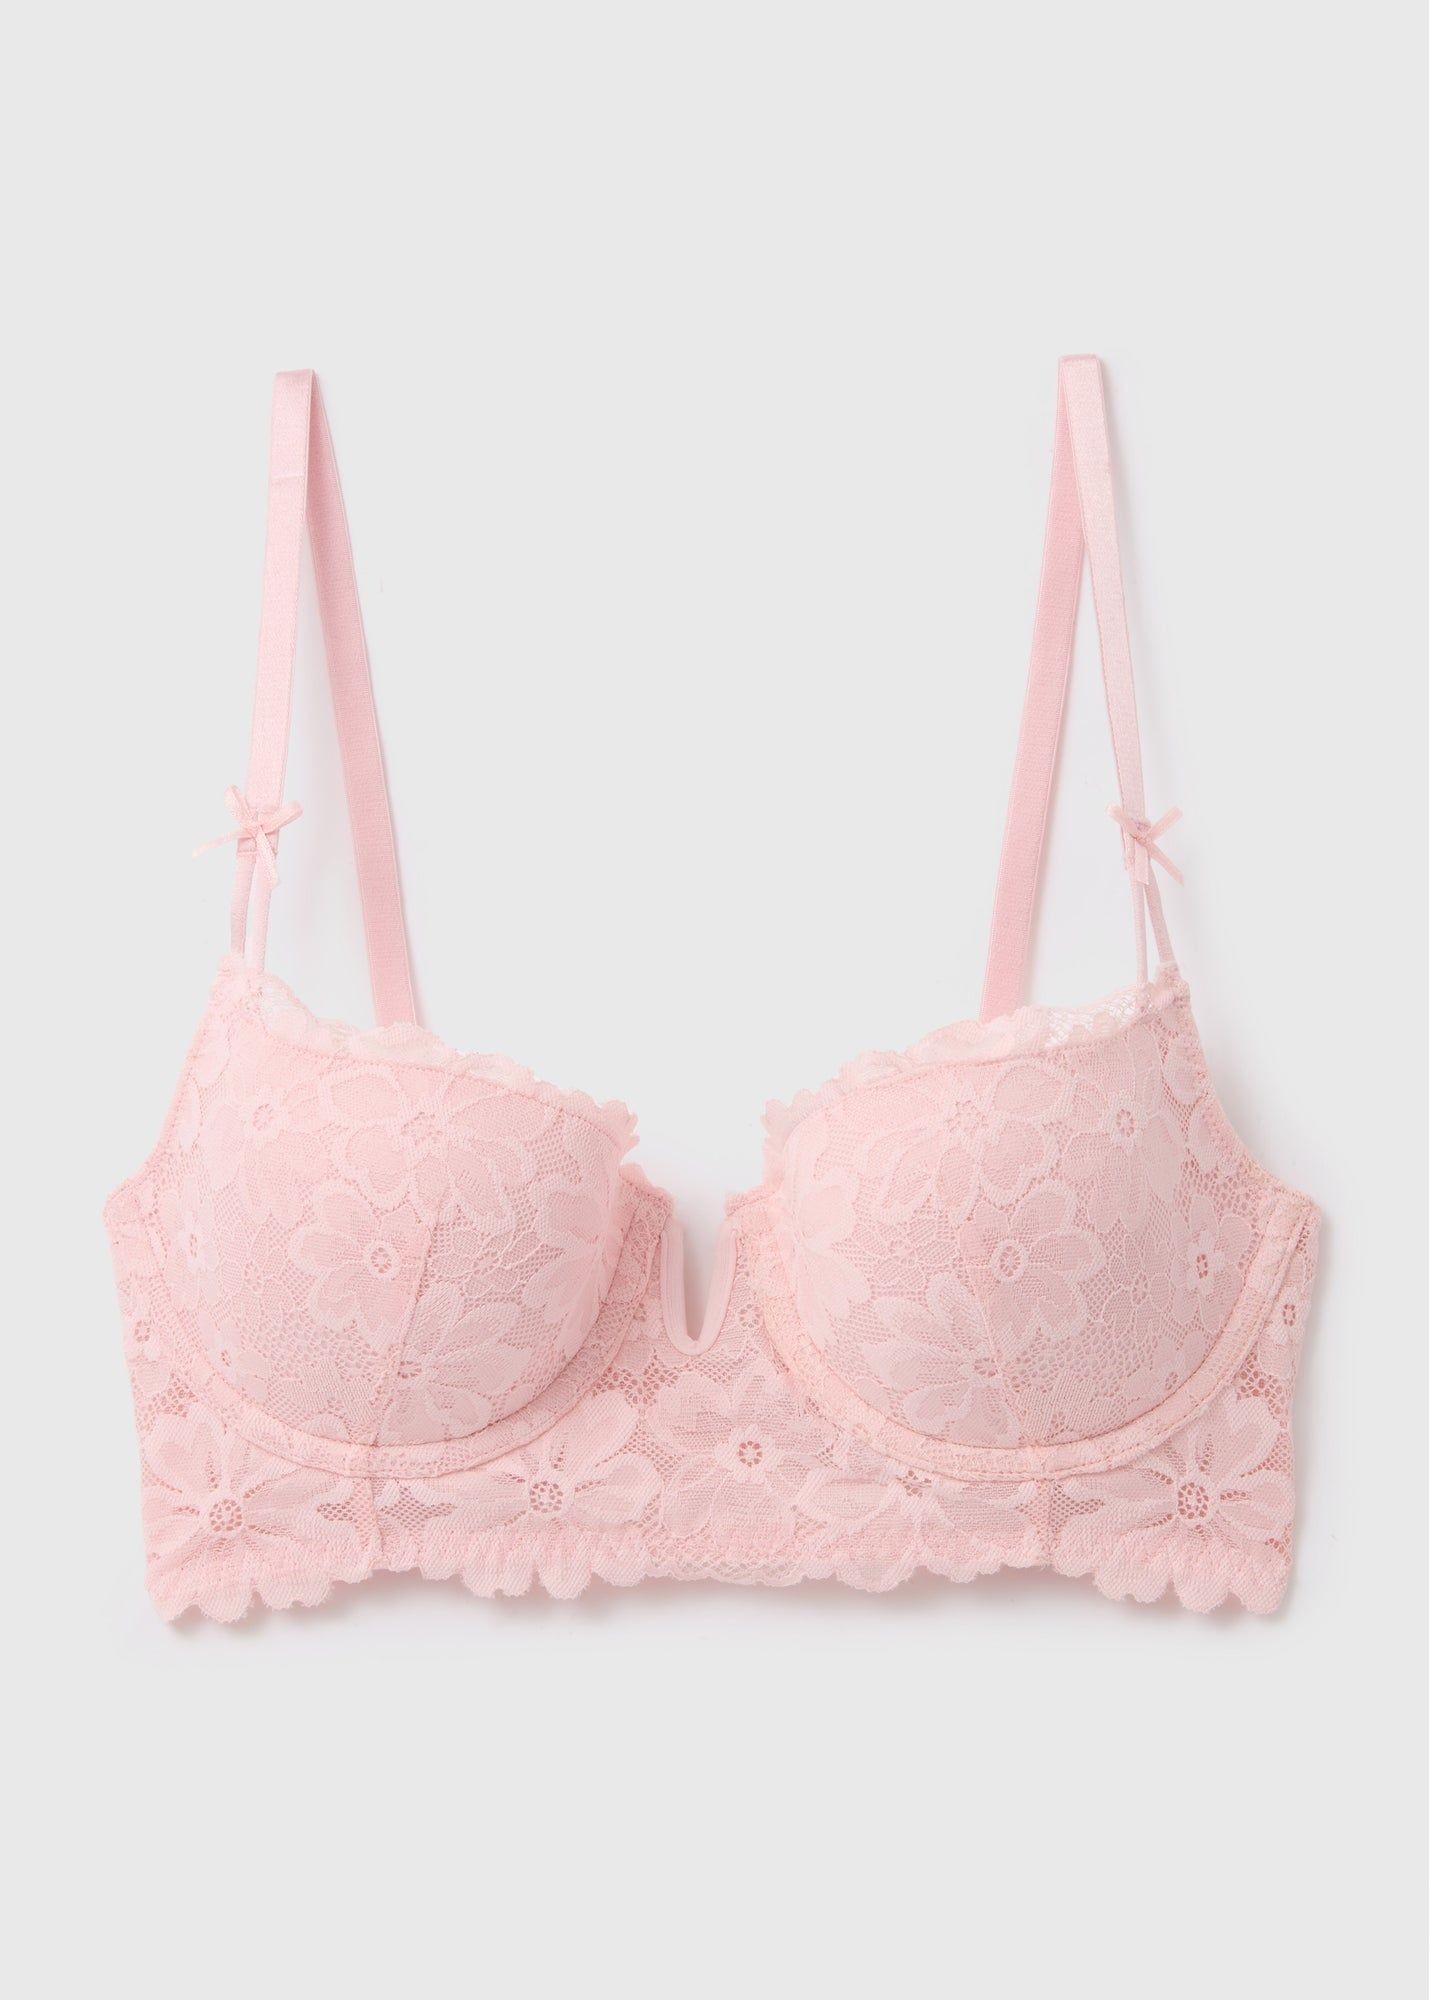 Buy Blue Lace Bra Online in UAE from Matalan